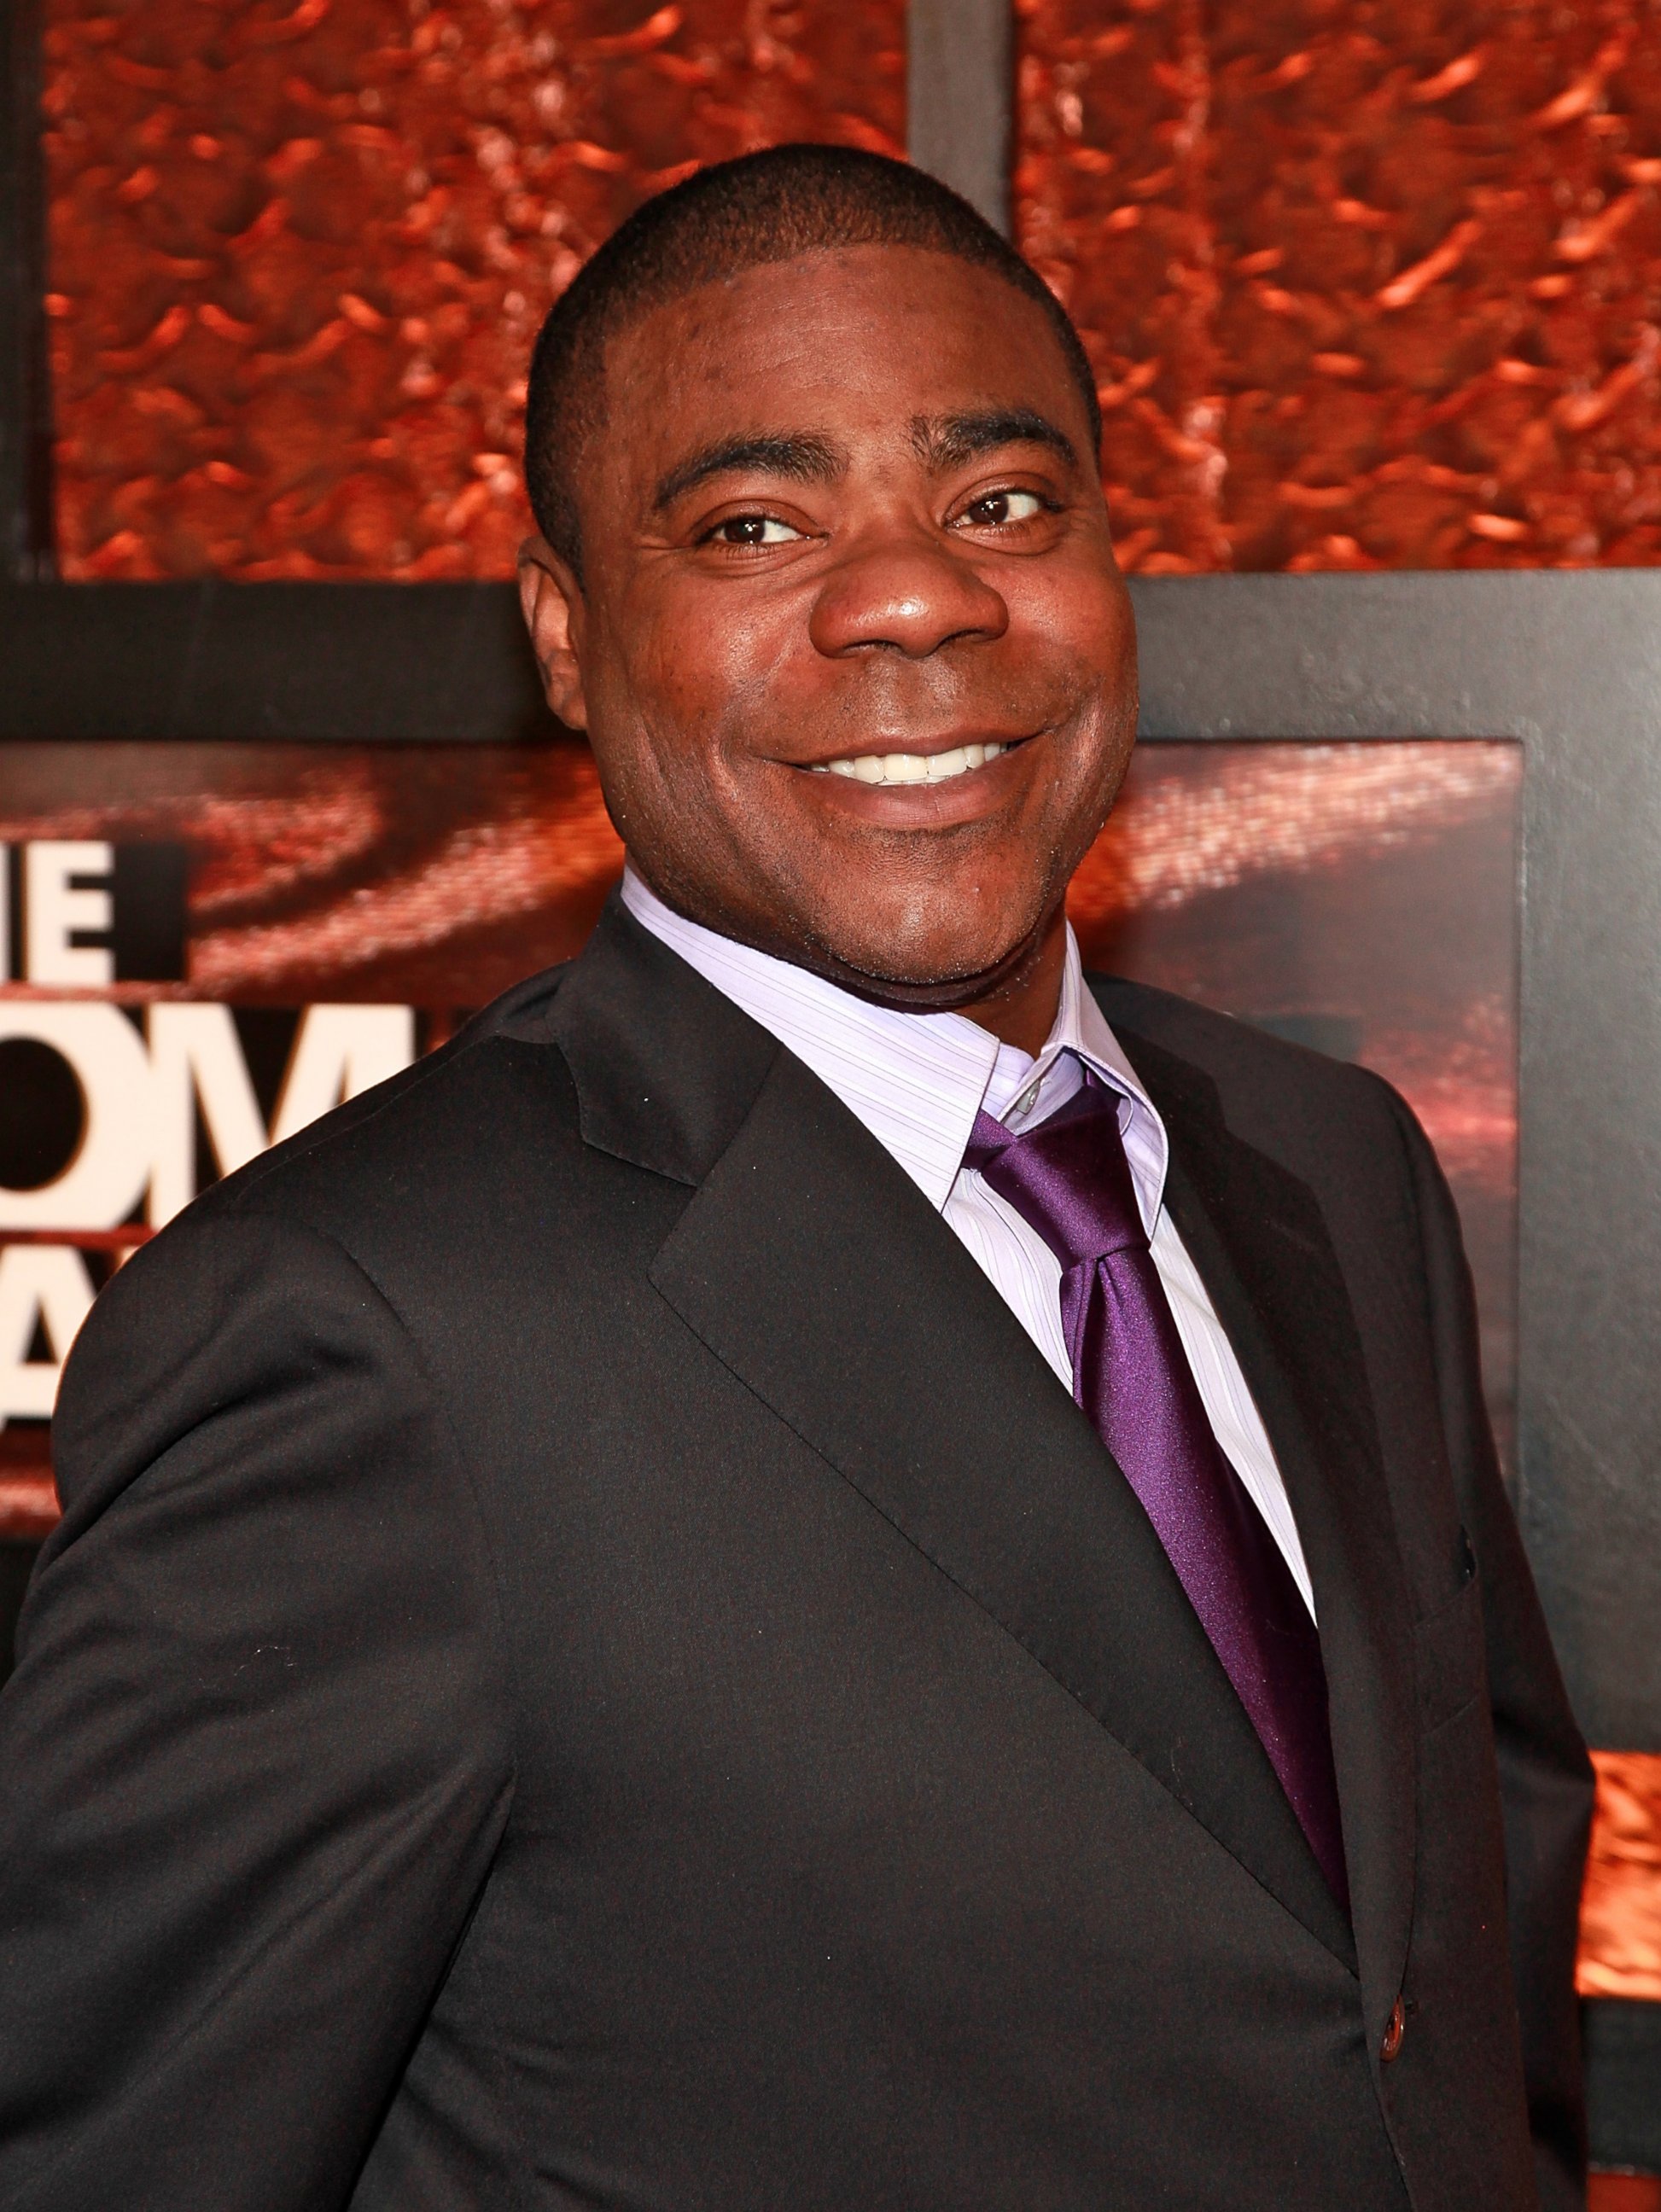 PHOTO: Comedian Tracy Morgan attends the First Annual Comedy Awards at Hammerstein Ballroom on March 26, 2011 in New York City.